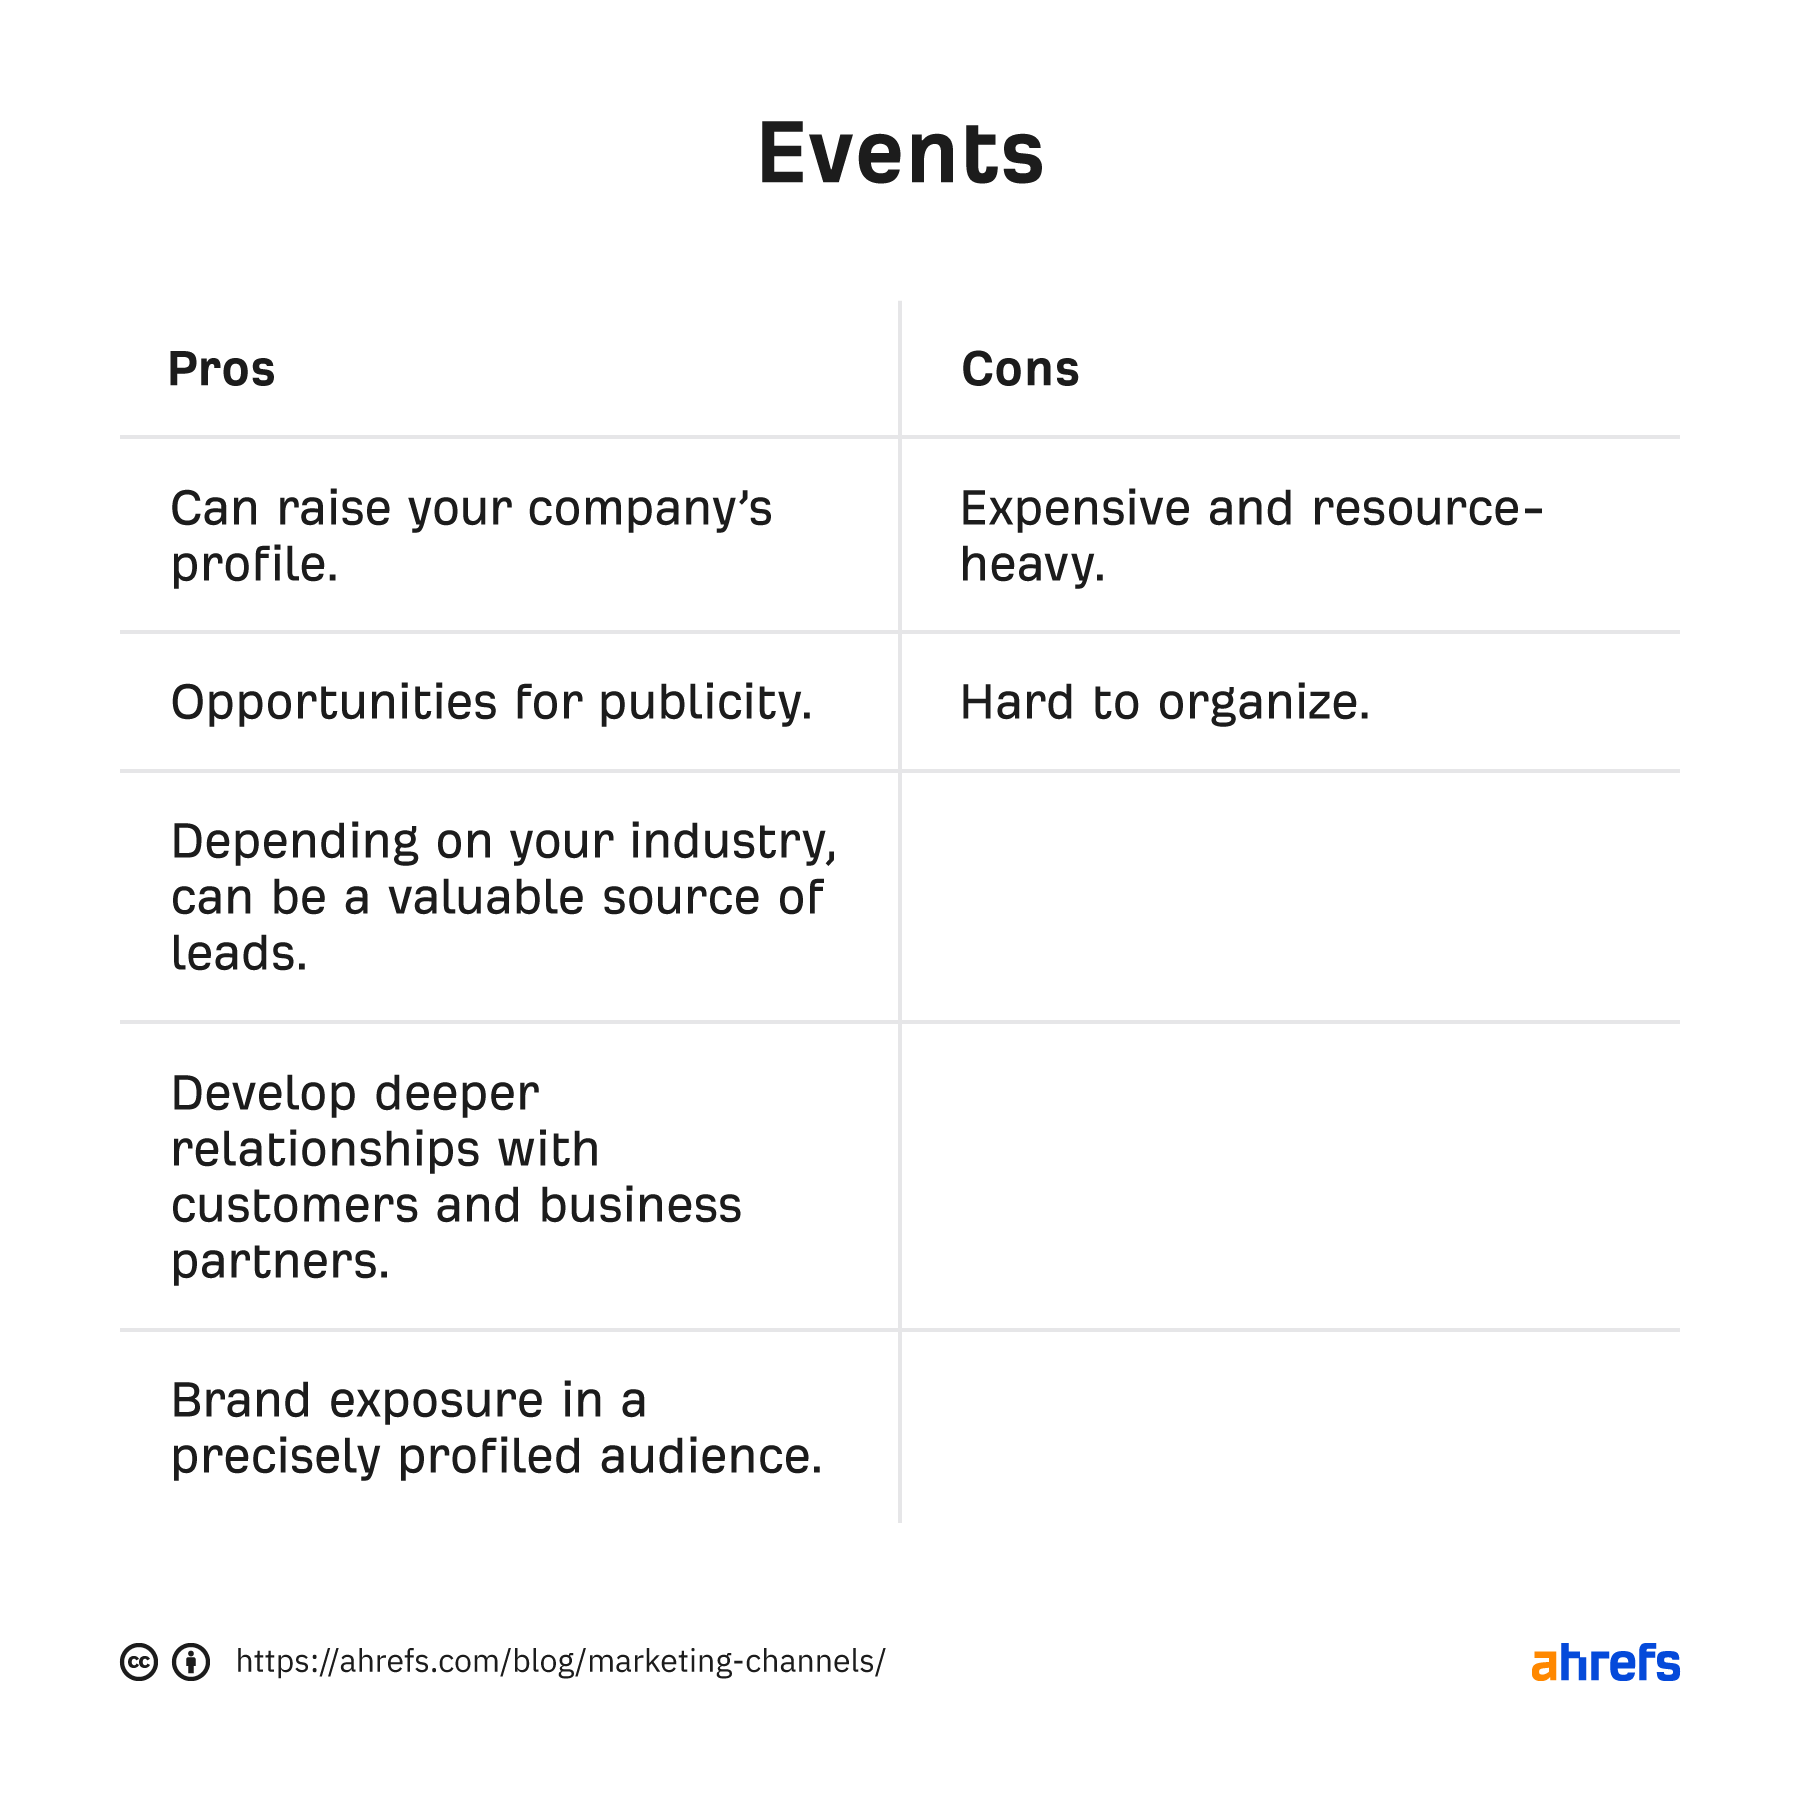 Pros and cons of events